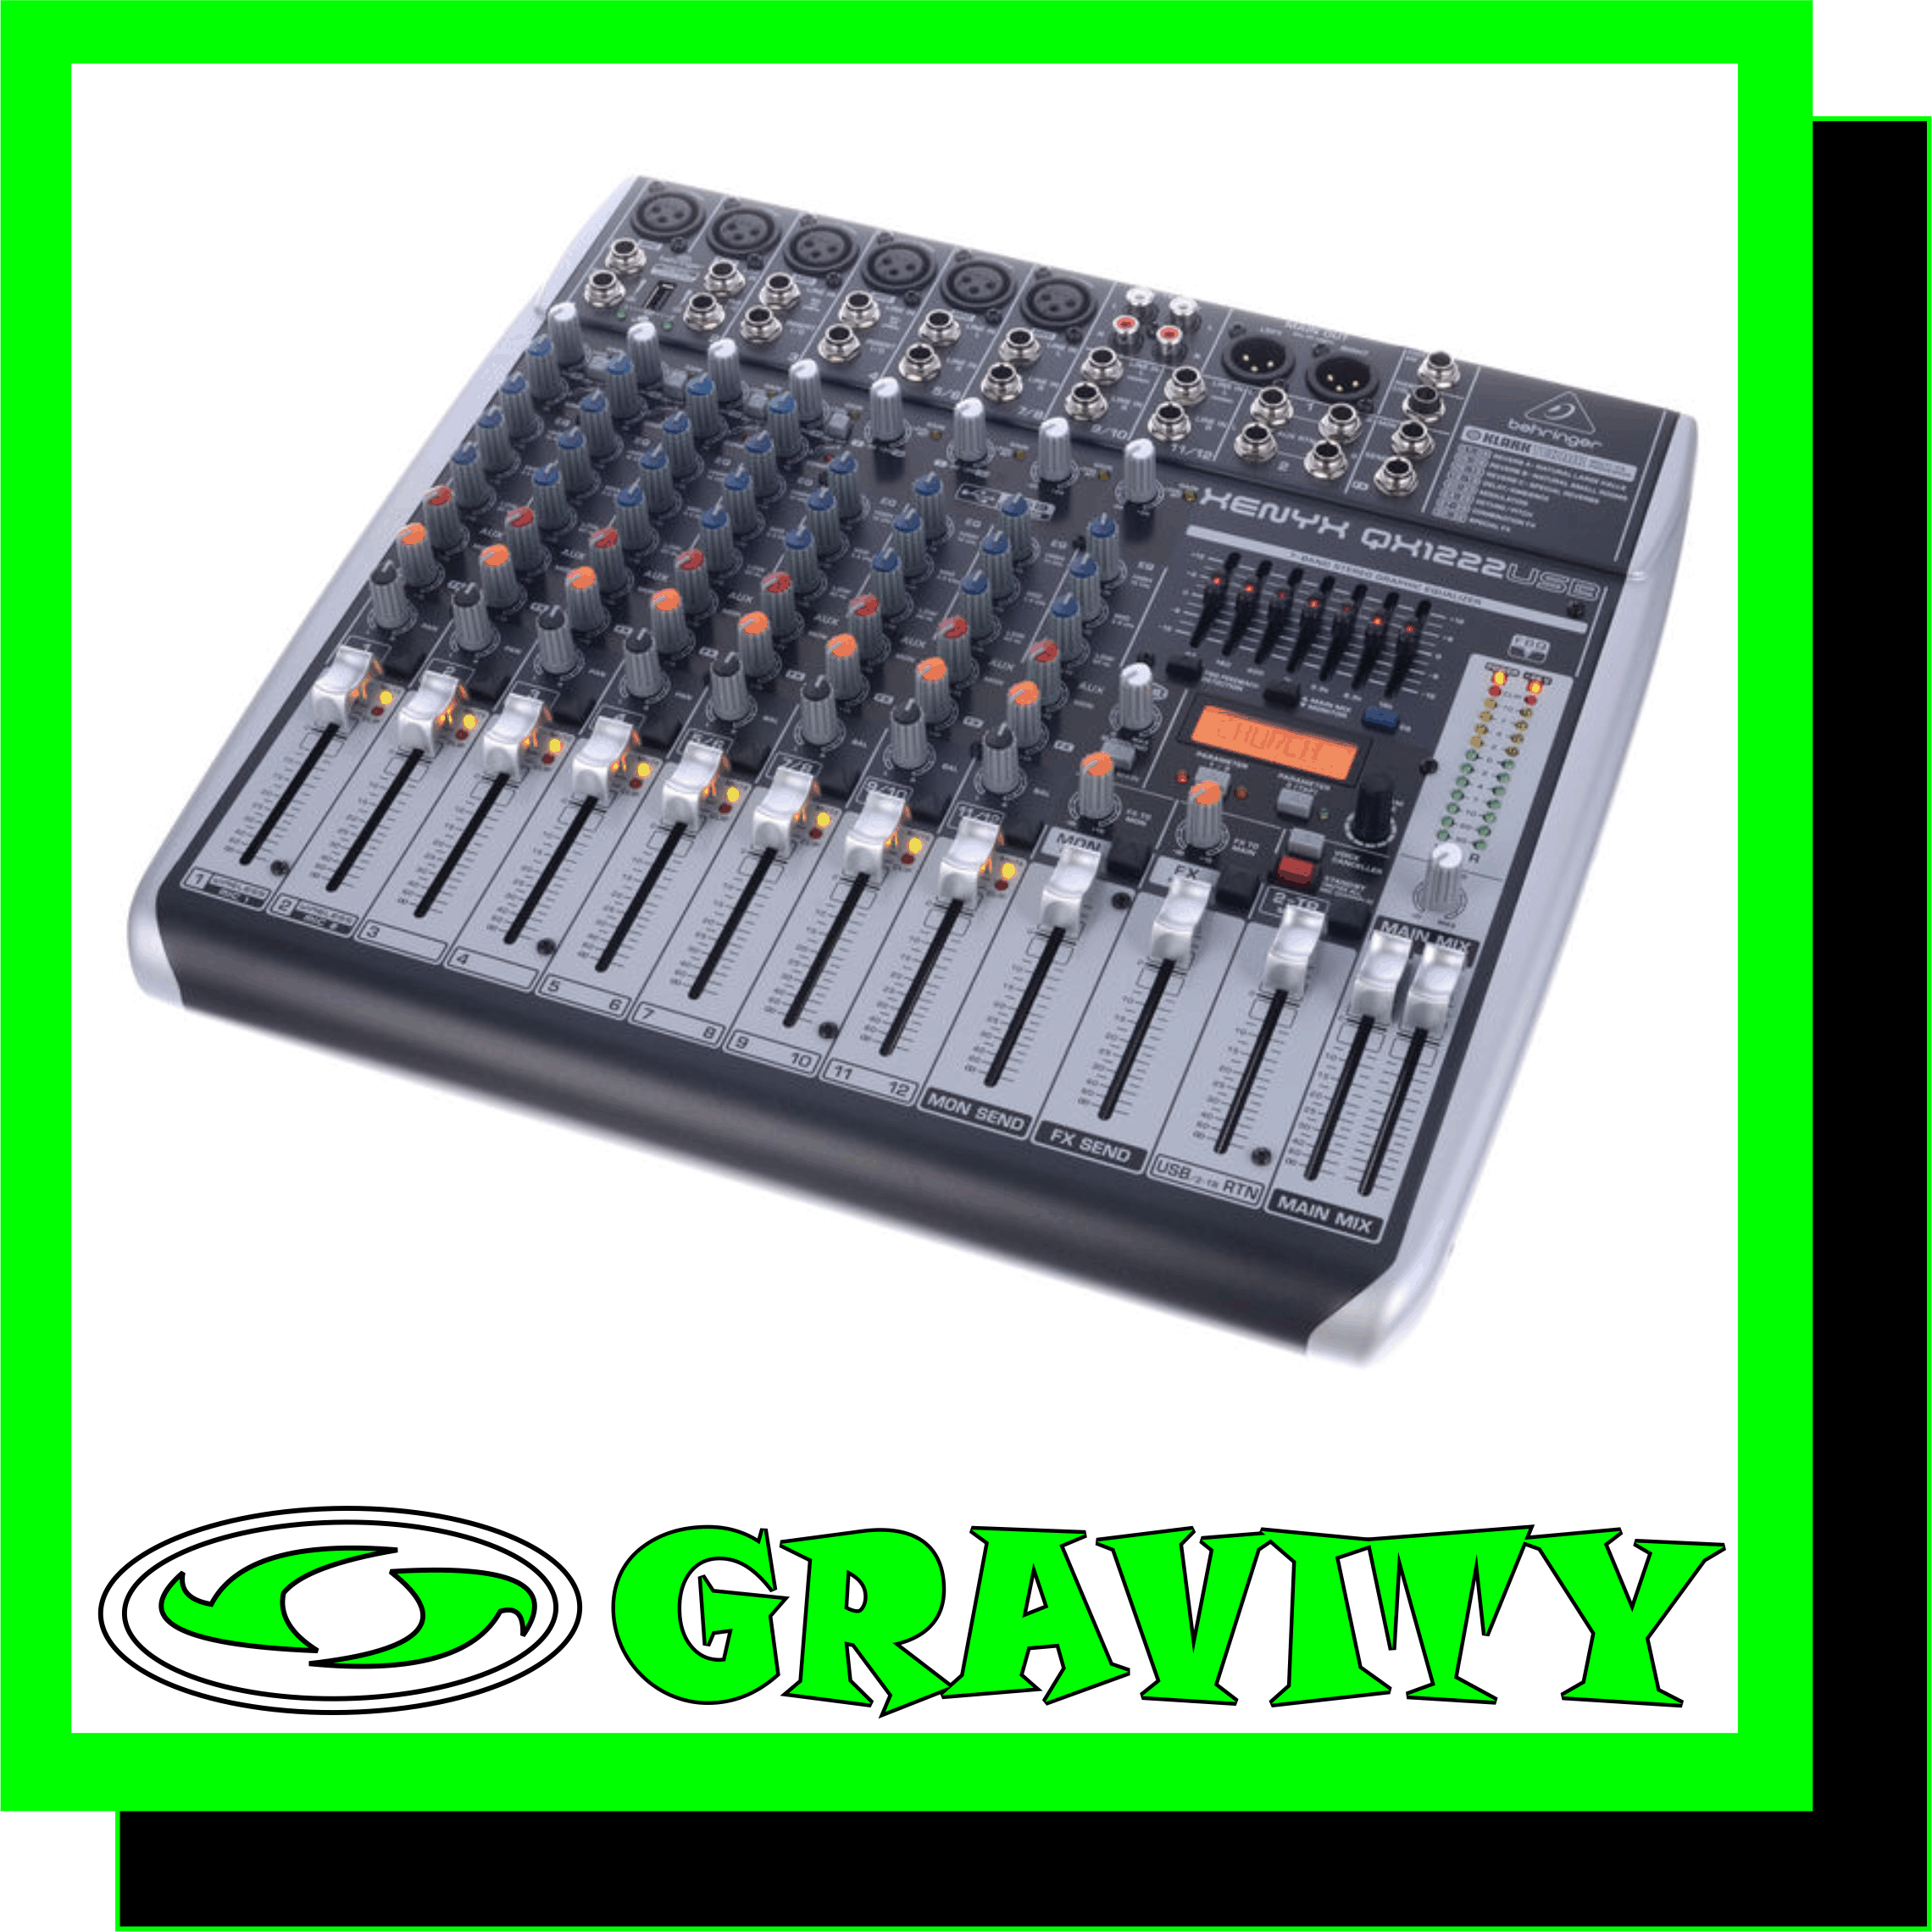 Behringer XENYX QX1222 USB 16 input Mixer  Product Features: -Premium ultra-low noise, high headroom mixer -4 state-of-the-art, phantom-powered XENYX Mic Preamps comparable to stand-alone boutique preamps -4 studio-grade compressors with super-easy “one-knob” functionality and control LED for professional vocal and instrumental sound -Ultra-high quality KLARK TEKNIK FX processor with LCD display, dual-parameters, Tap function and storable user parameter settings -“Wireless-ready” for high-quality BEHRINGER digital wireless system (not included) -Built-in stereo USB/Audio Interface to connect directly to your computer. Free audio recording, editing and podcasting software plus 150 instrument/effect plug-ins -downloadable at behringer.com -Neo-classic “British” 3-band EQs for warm and musical sound -7-band stereo graphic EQ allows precise frequency correction of monitor or main mixes -Revolutionary FBQ Feedback Detection System instantly reveals critical frequencies -Breathtaking XPQ 3D stereo surround effect for more vitality and enhanced stereo image -Voice Canceller function for easy-to-use sing-along applications -4 fully equipped stereo input channels featuring 2 additional mic inputs on channels 5/6 and 7/8, 3-band EQ and input trim control -Channel inserts on each mono channel for flexible connection of outboard equipment -2 aux sends per channel: 1 pre fader for monitoring, 1 post fader (for internal FX and/or as external send); 2 multi-functional stereo aux returns -Balanced main mix outputs with gold-plated XLR connectors, headphone/control room output and stereo rec outputs -Long-wearing 60-mm logarithmic-taper faders and sealed rotary controls -“Planet Earth” switching power supply for maximum flexibility (100 – 240 V~), noise-free audio, superior transient response plus low power consumption for energy saving -High-quality components and exceptionally rugged construction ensure long life -Conceived and designed by BEHRINGER Germany